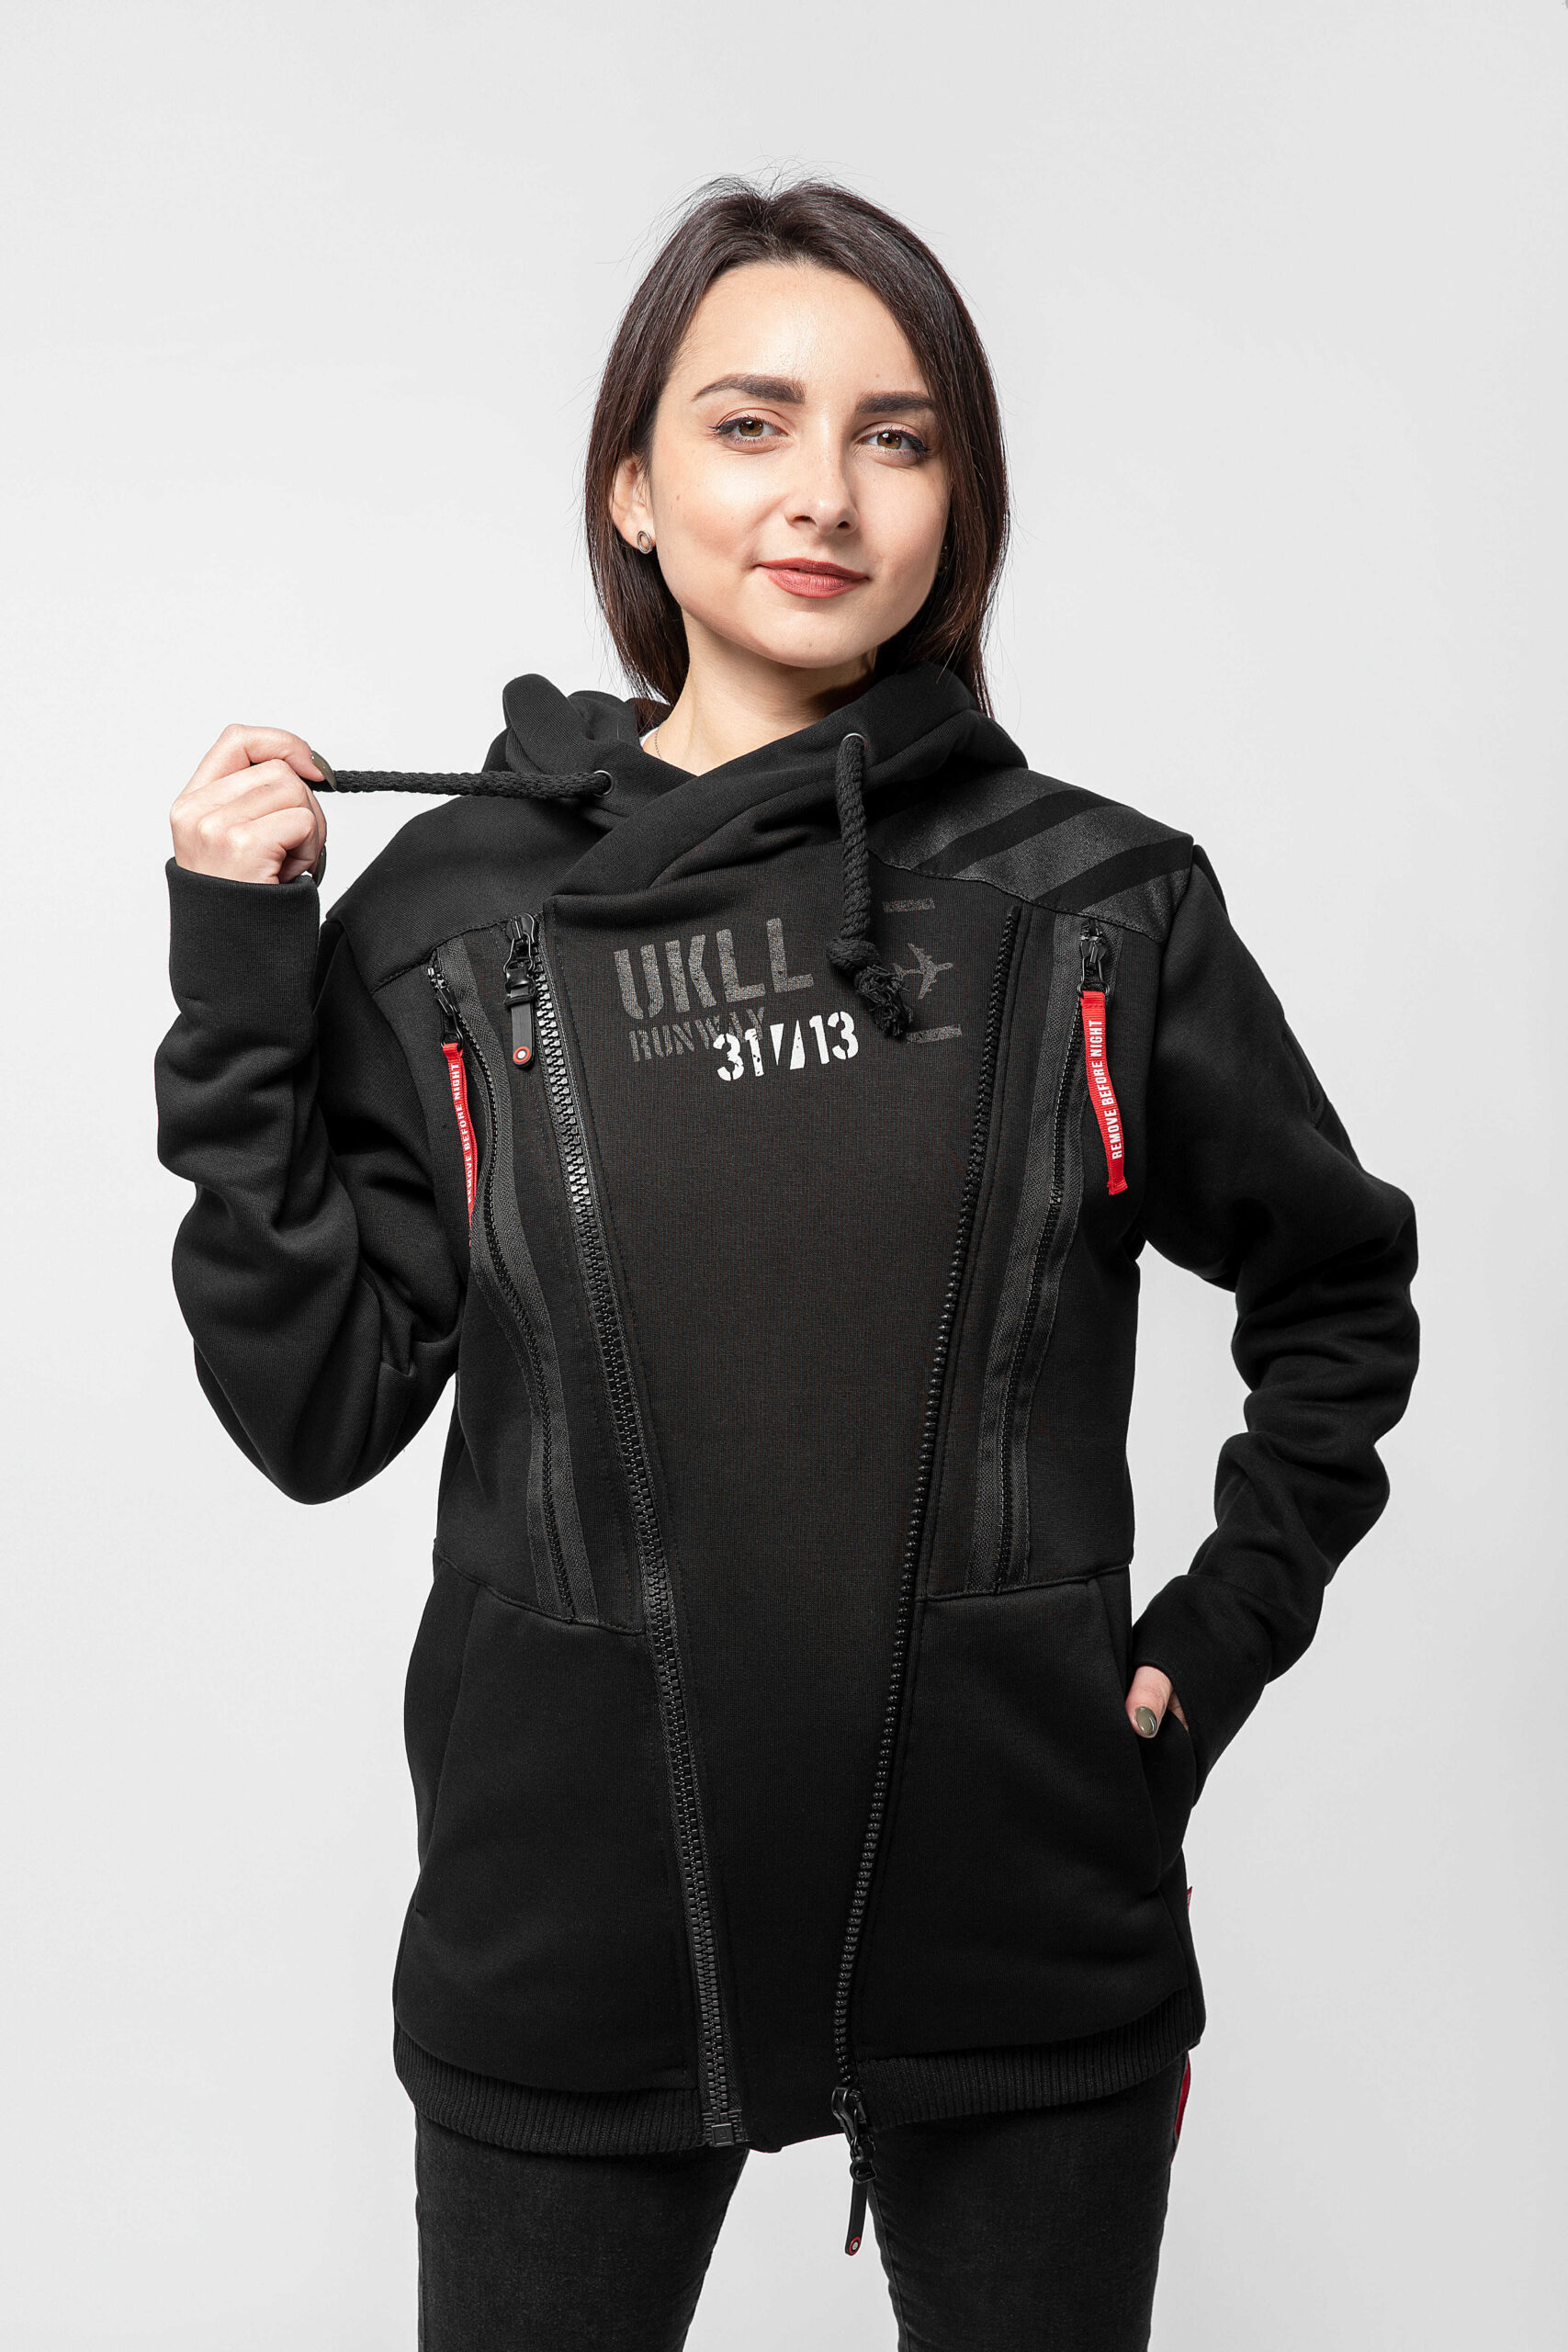 Women's Hoodie Runway. Color black.  The hoodie looks great on a female figure!
Three-cord thread fabric: 77% cotton, 23% polyester.